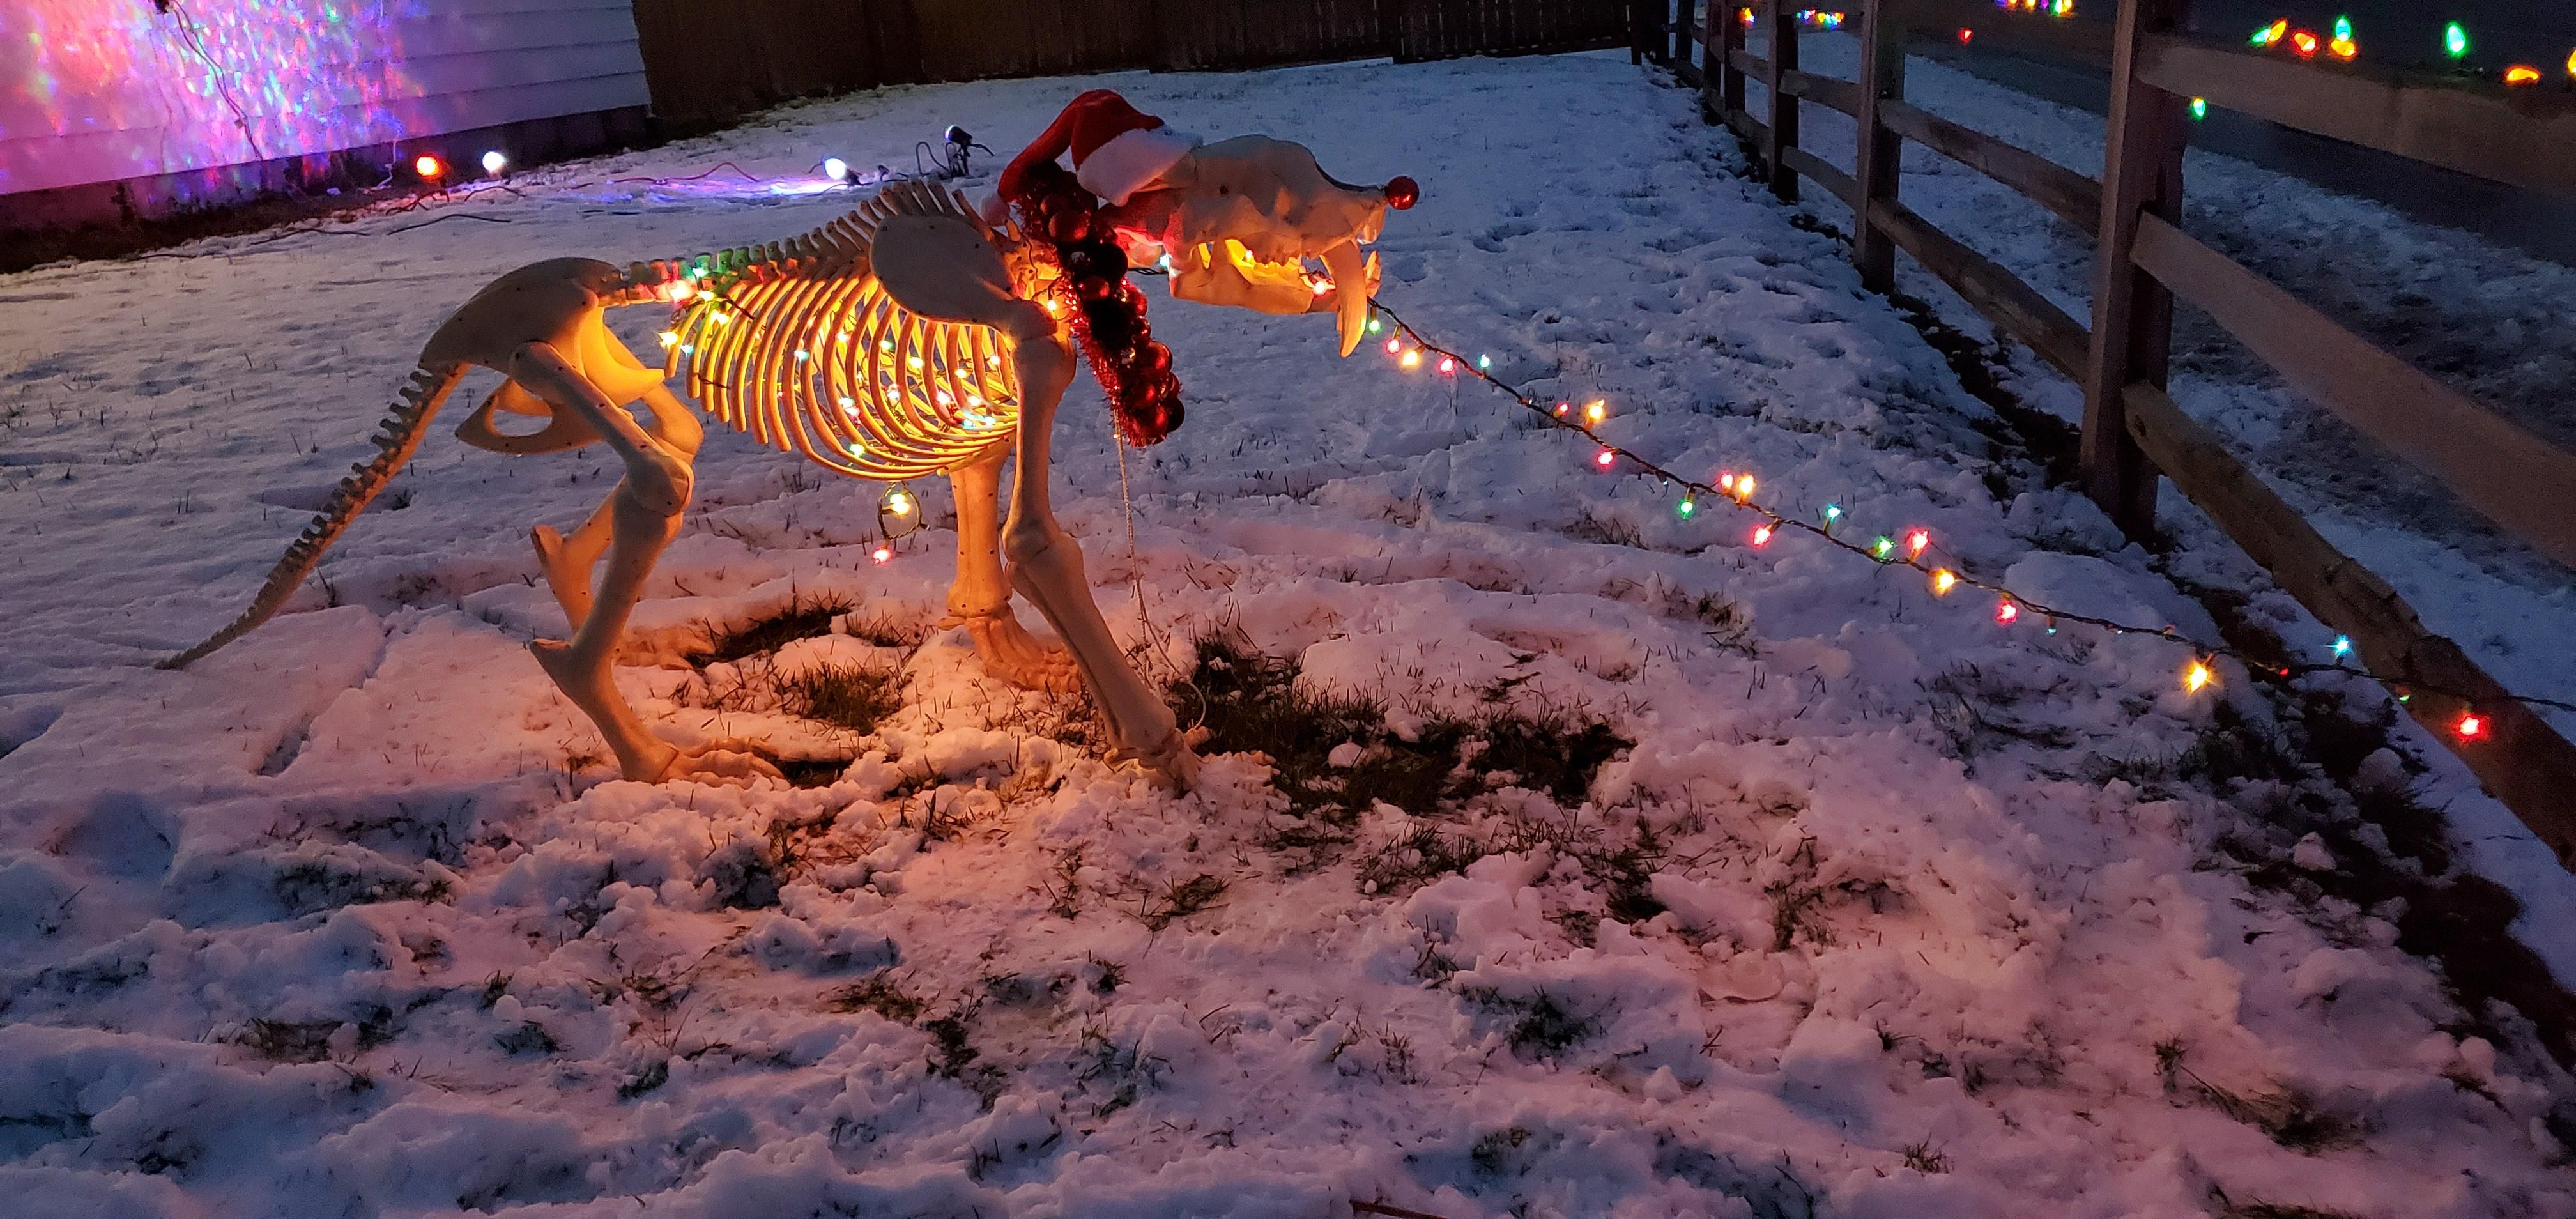 I didn't have a string of lights long enough for the whole fence so I made Kevin my Halloween sabertooth tiger eat the lights instead